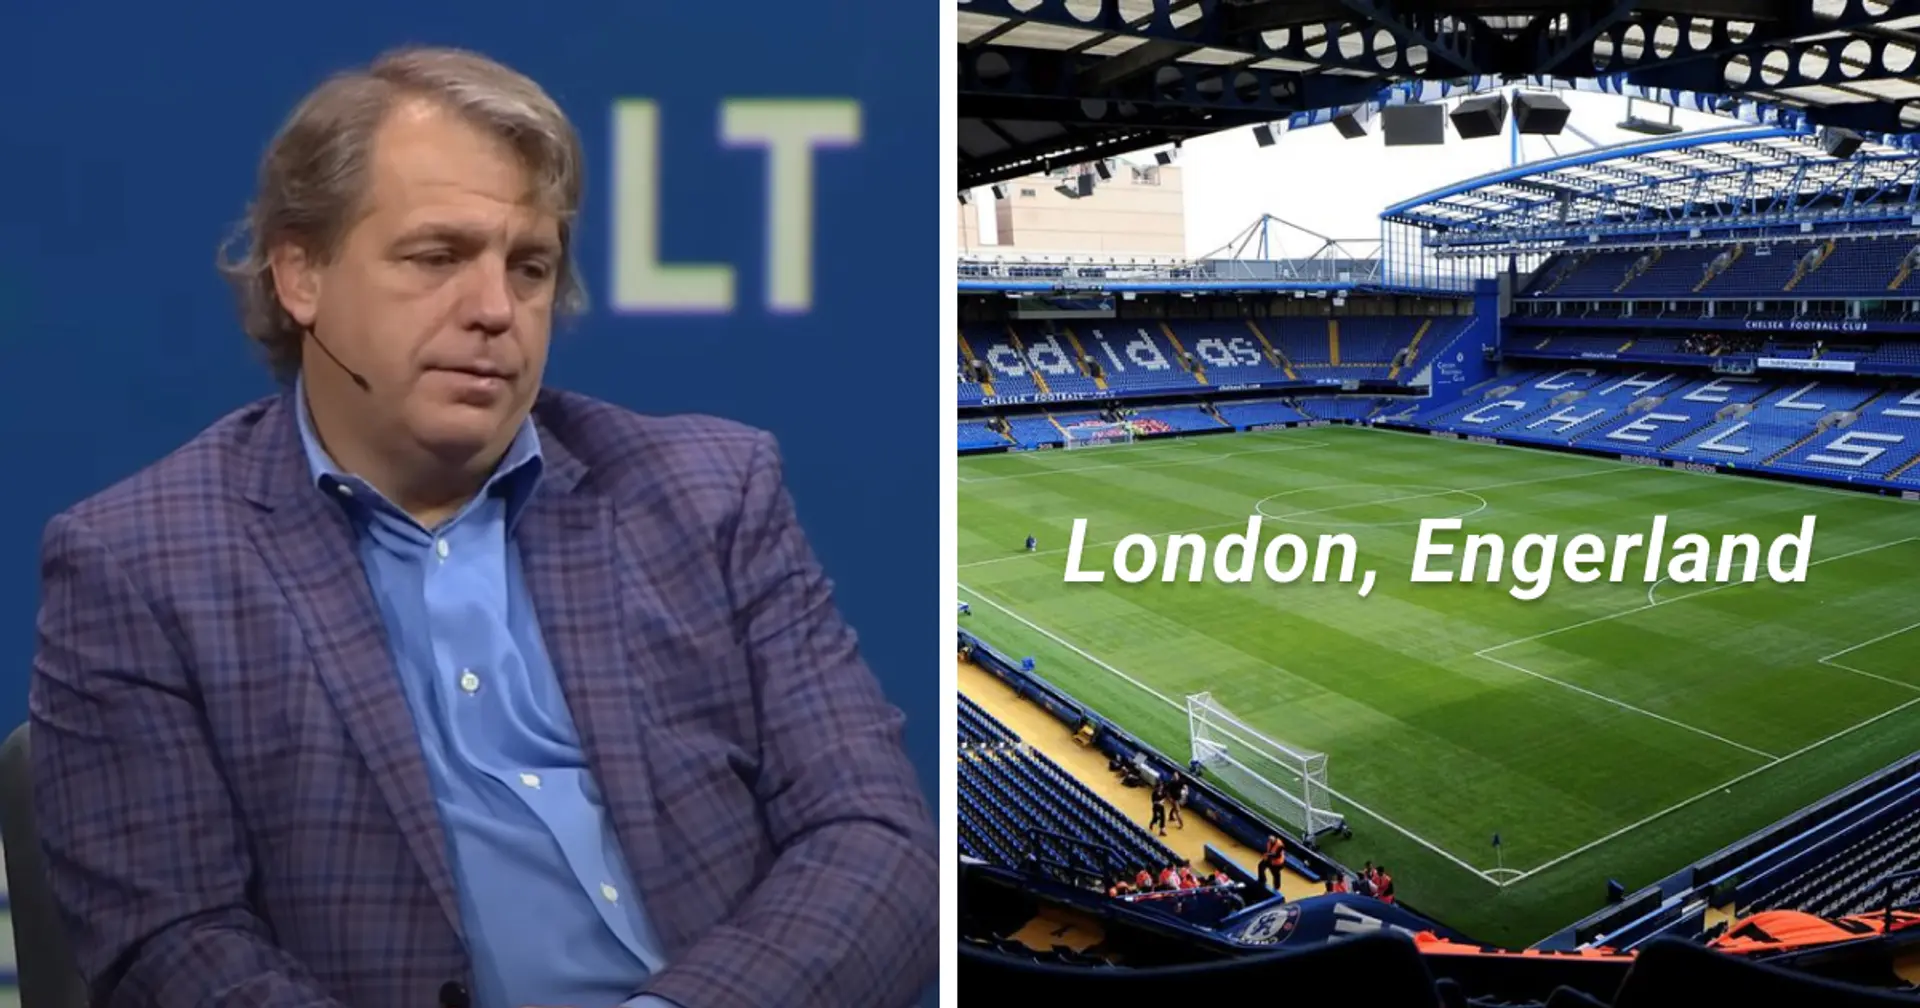 'They just spent £600m on random players': Guy claims it's pointless to support club like Chelsea